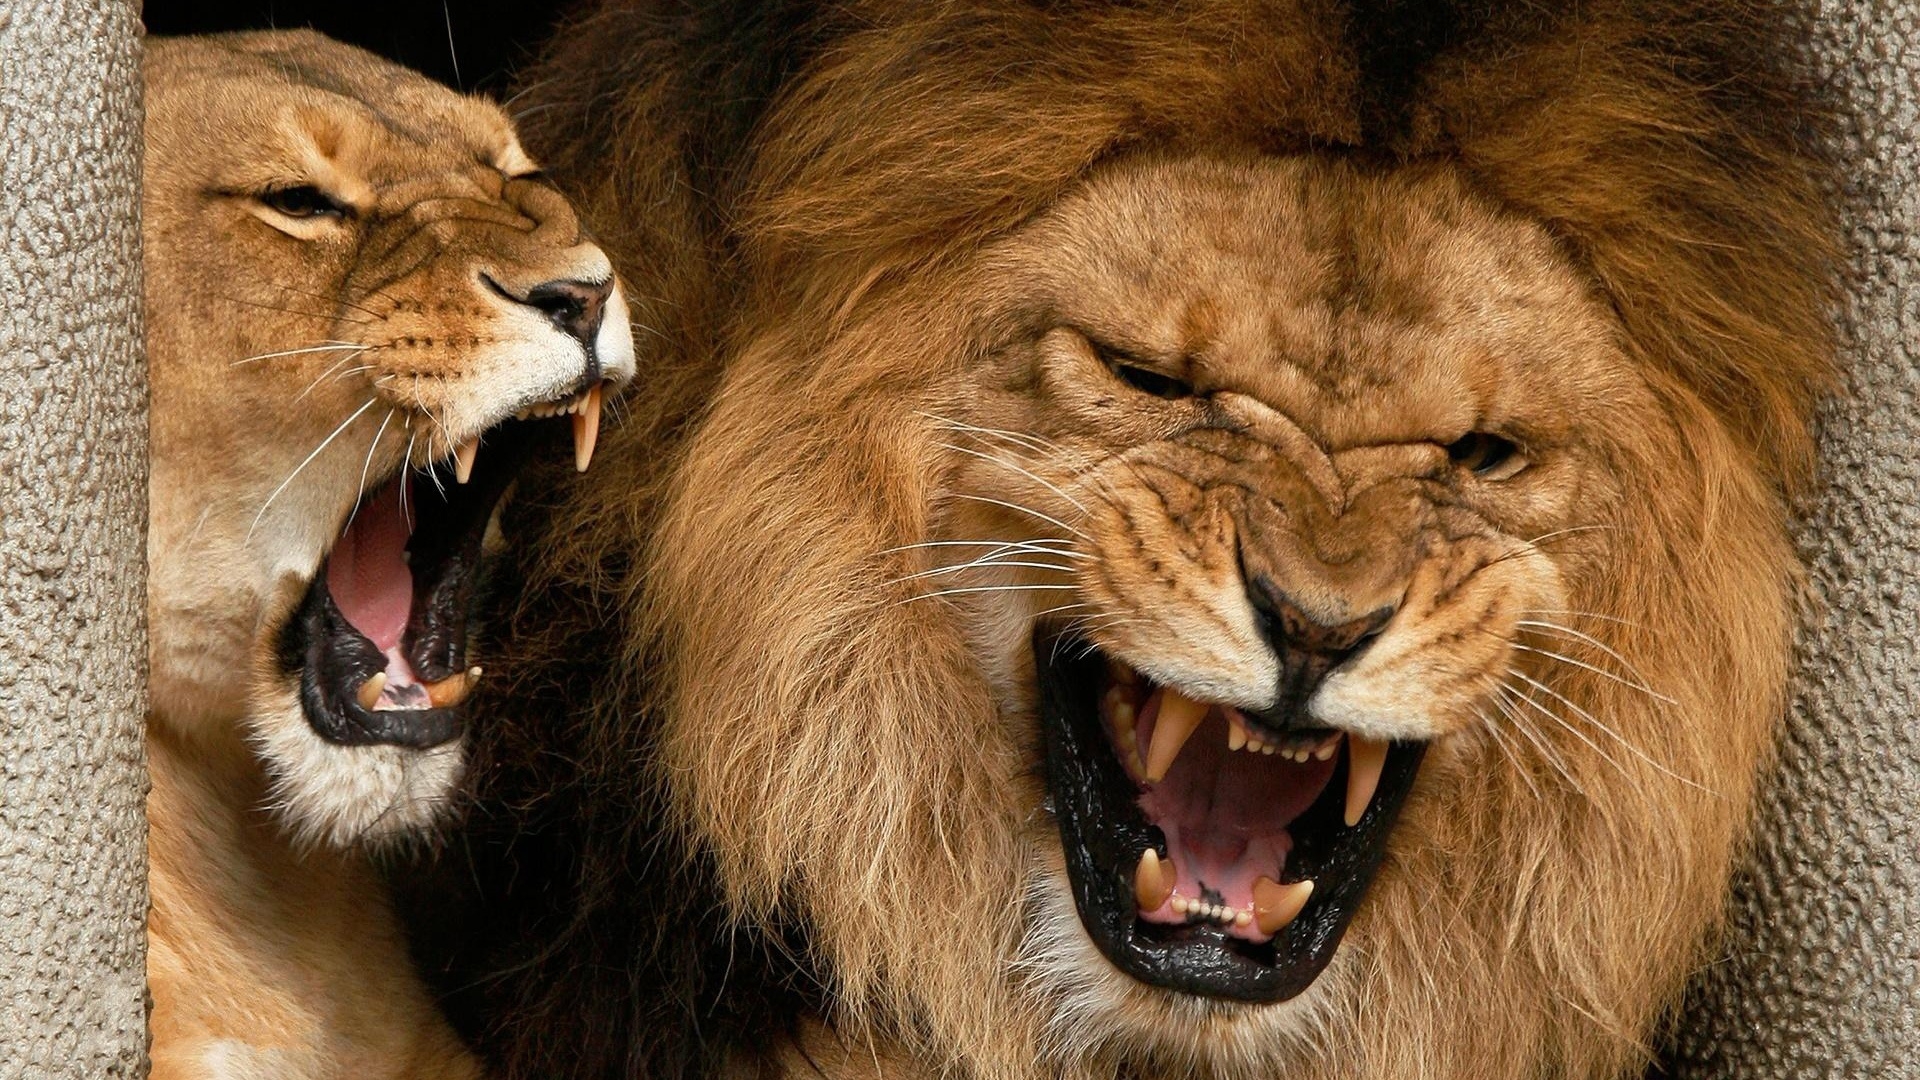 Roaring Lions for 1920 x 1080 HDTV 1080p resolution